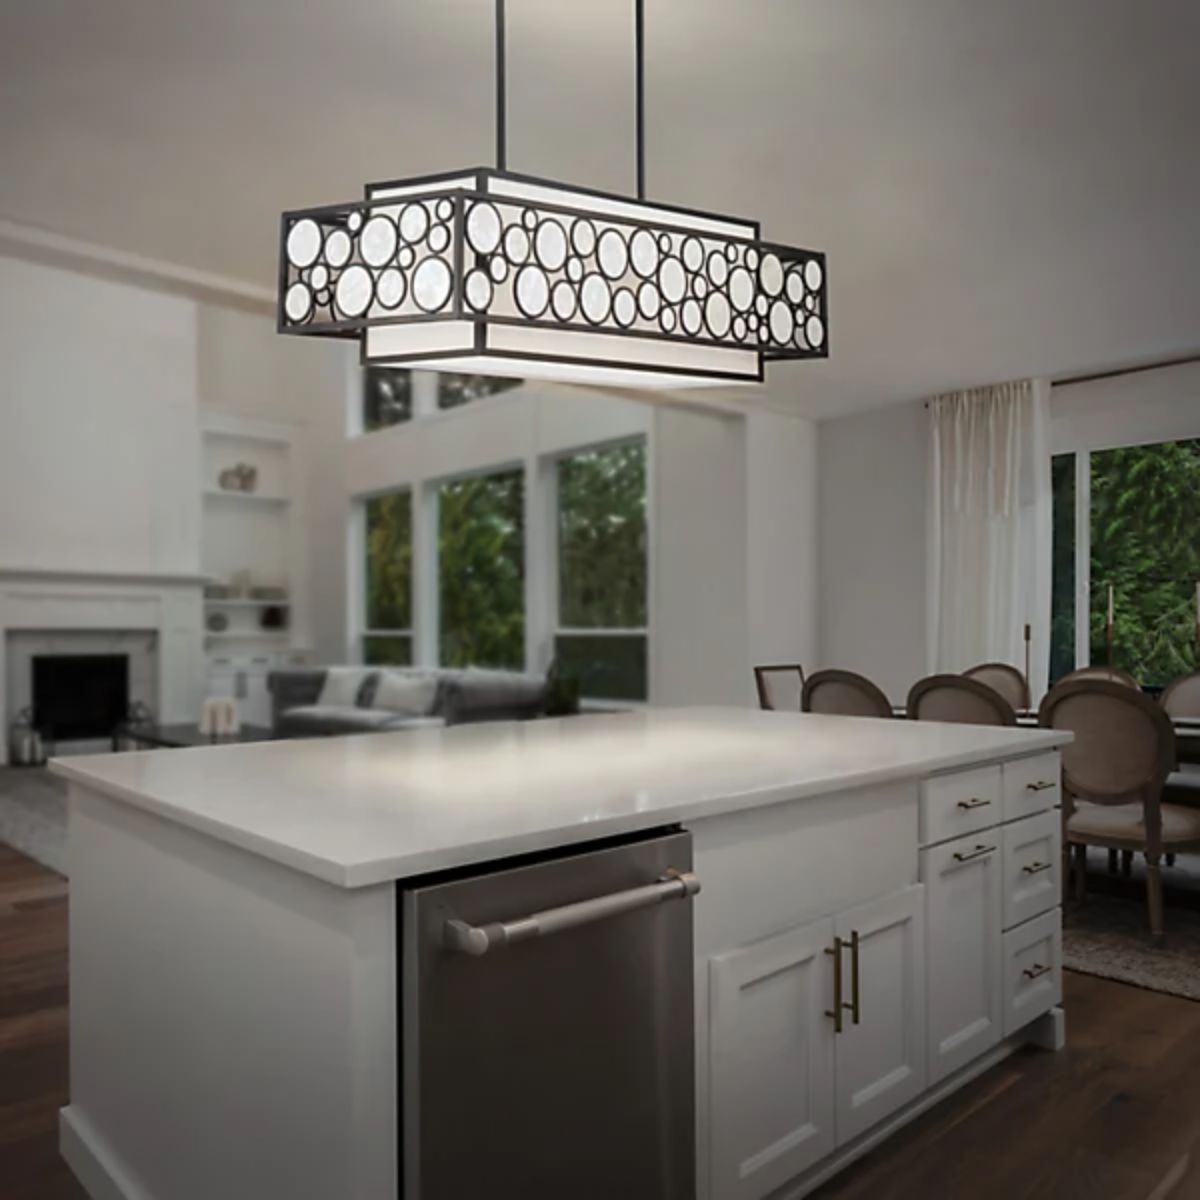 Mosaic 42 in. 4 lights Pendant Light Oil Rubbed Bronze Finish